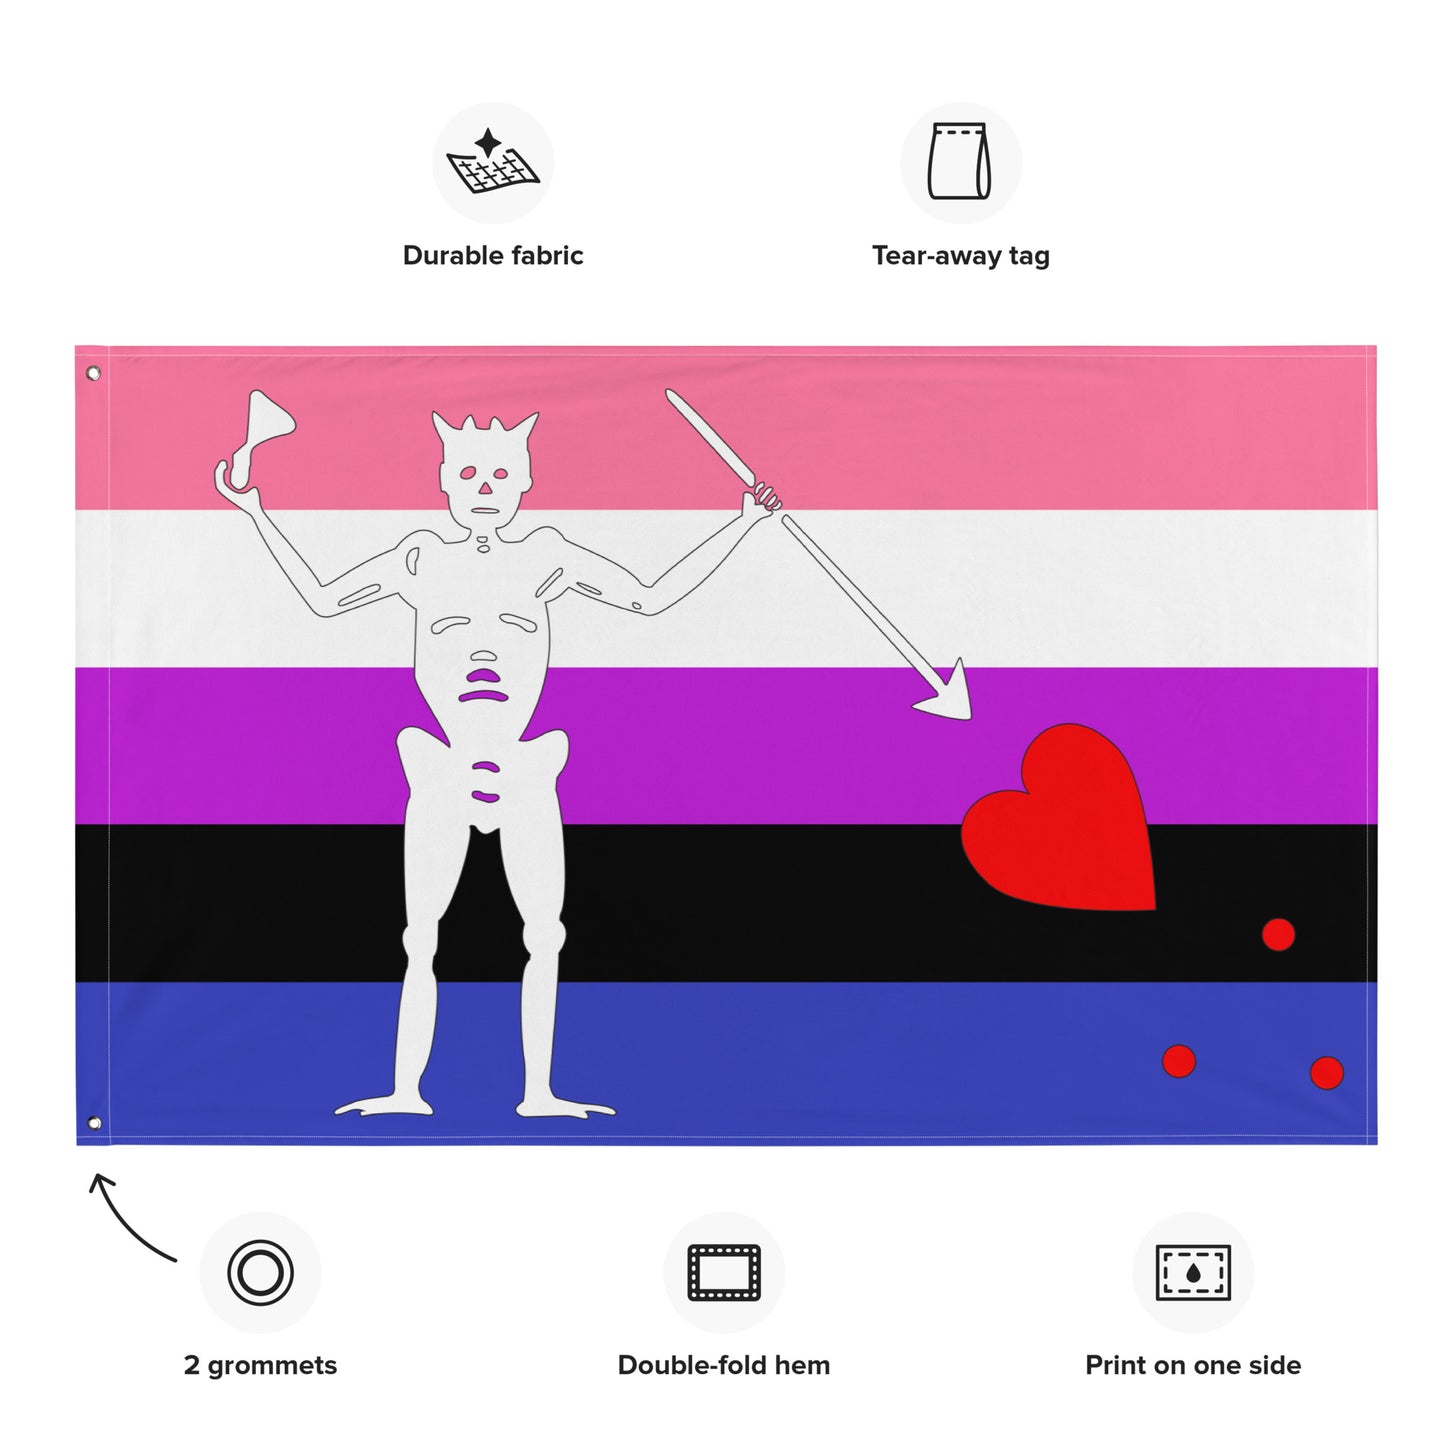 the genderfluid flag with blackbeard's symbol surrounded by the specifications of "durable fabric, tear-away tag, 2 grommets, double-fold hem, print on one side"